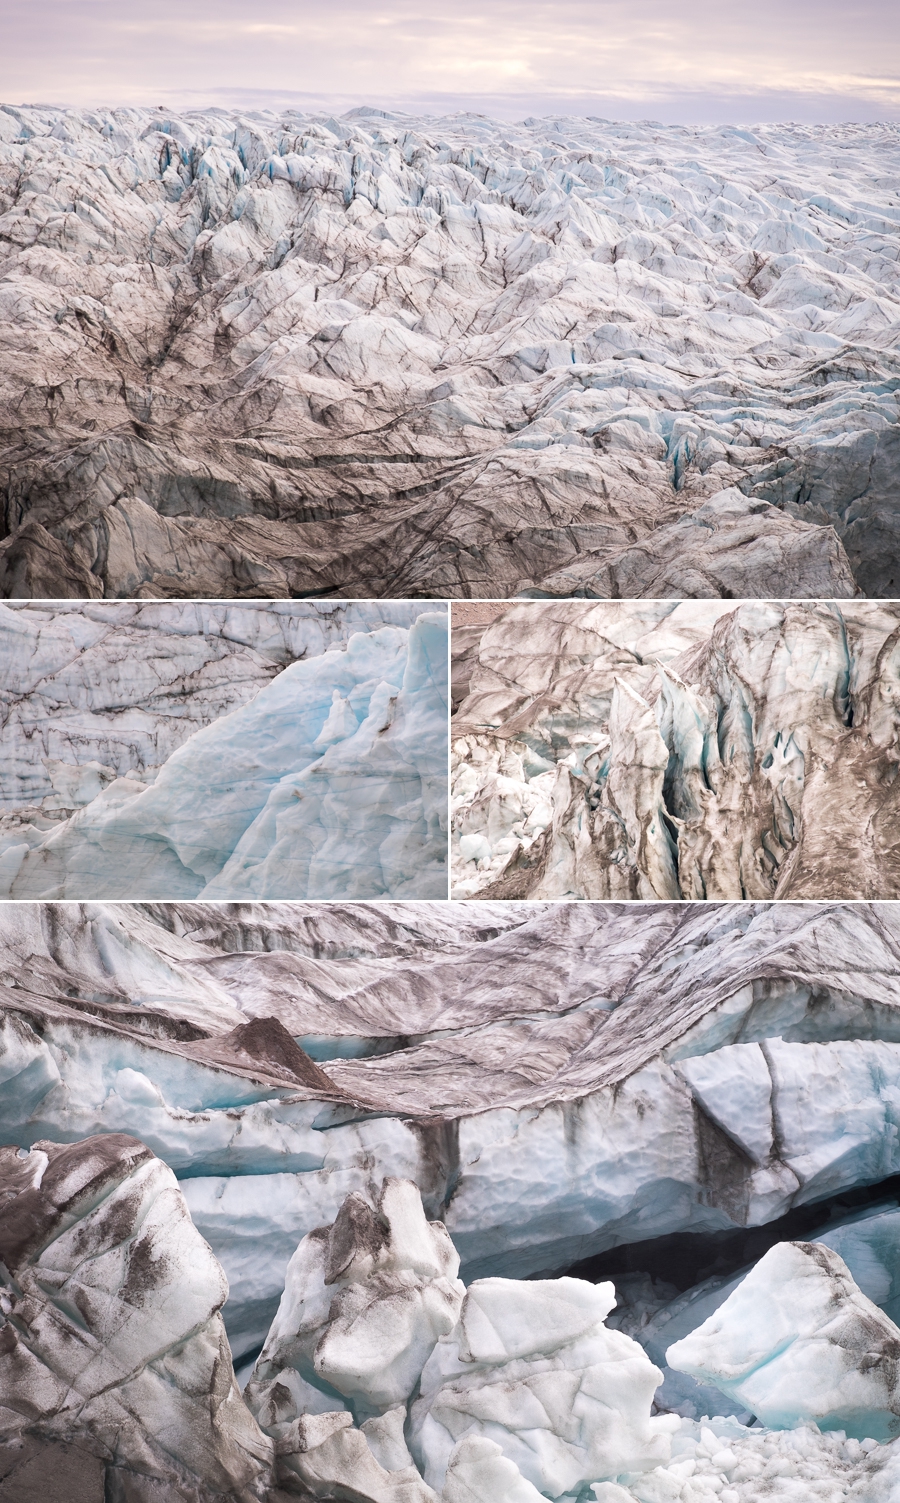 different views of the ice making up the Russell Glacier near Kangerlussuaq in West Greenland